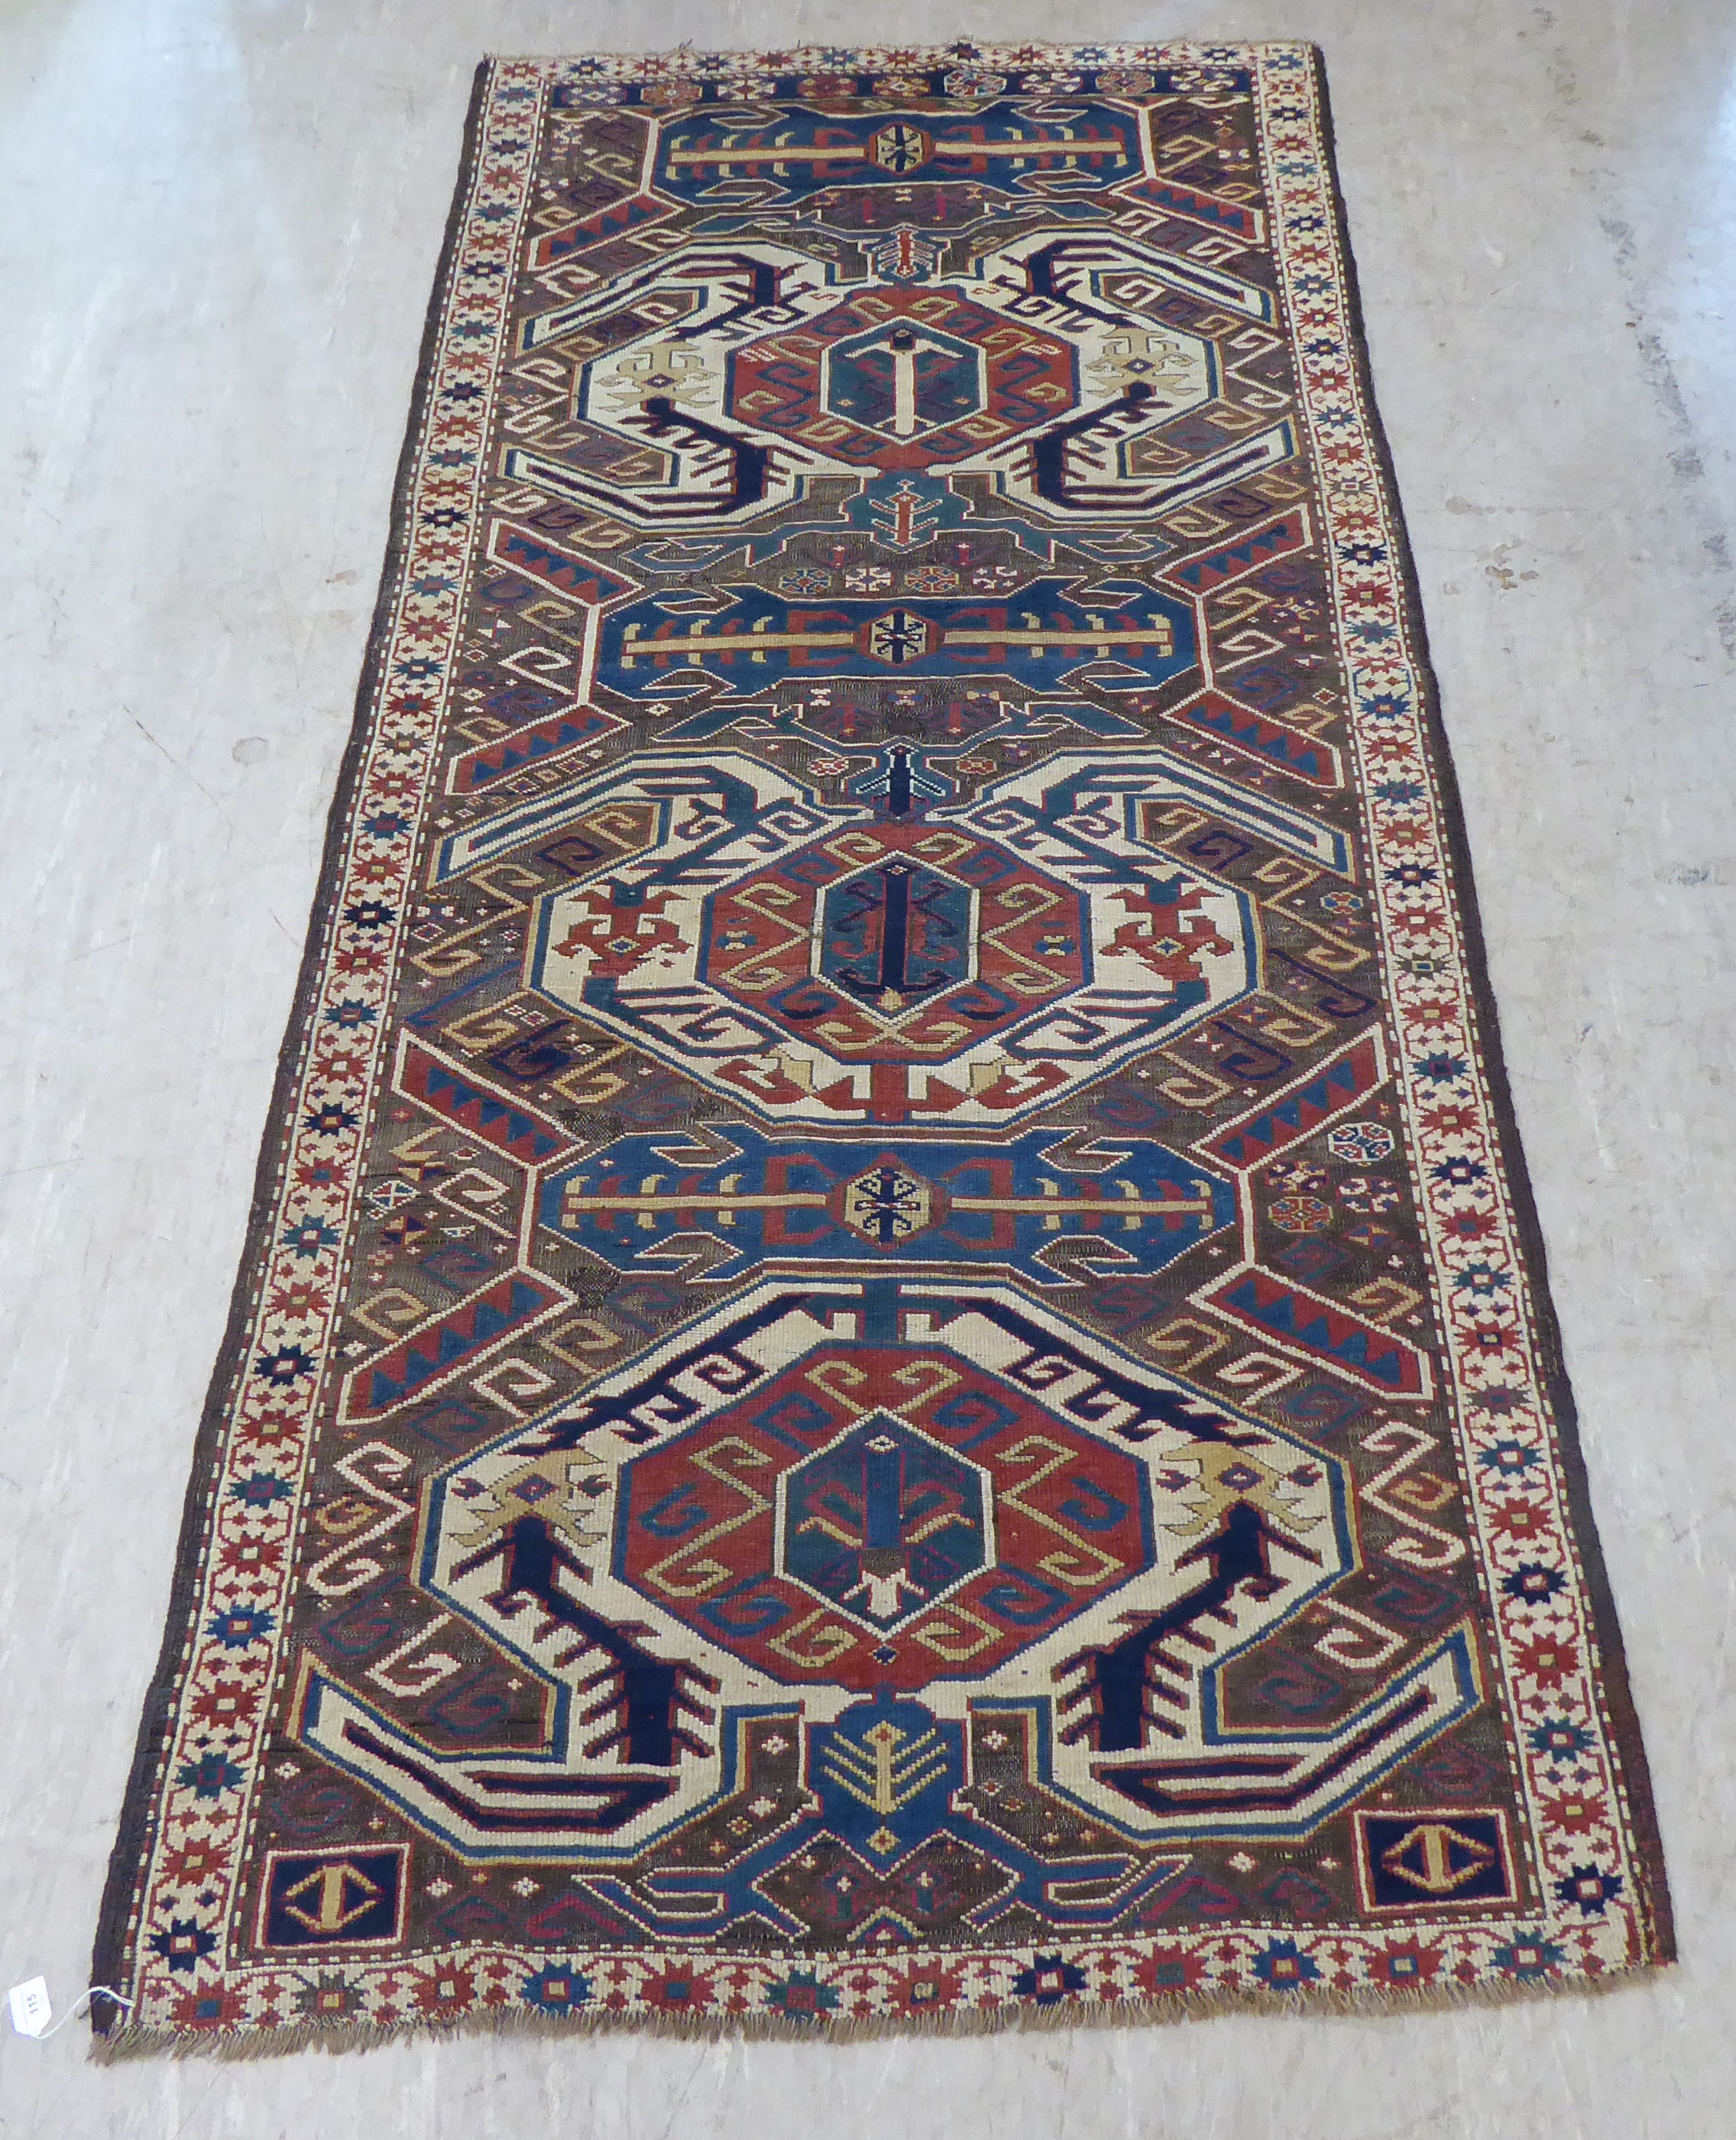 A Turkish Kilim style runner, decorated with repeating stylised designs, on a multi-coloured ground